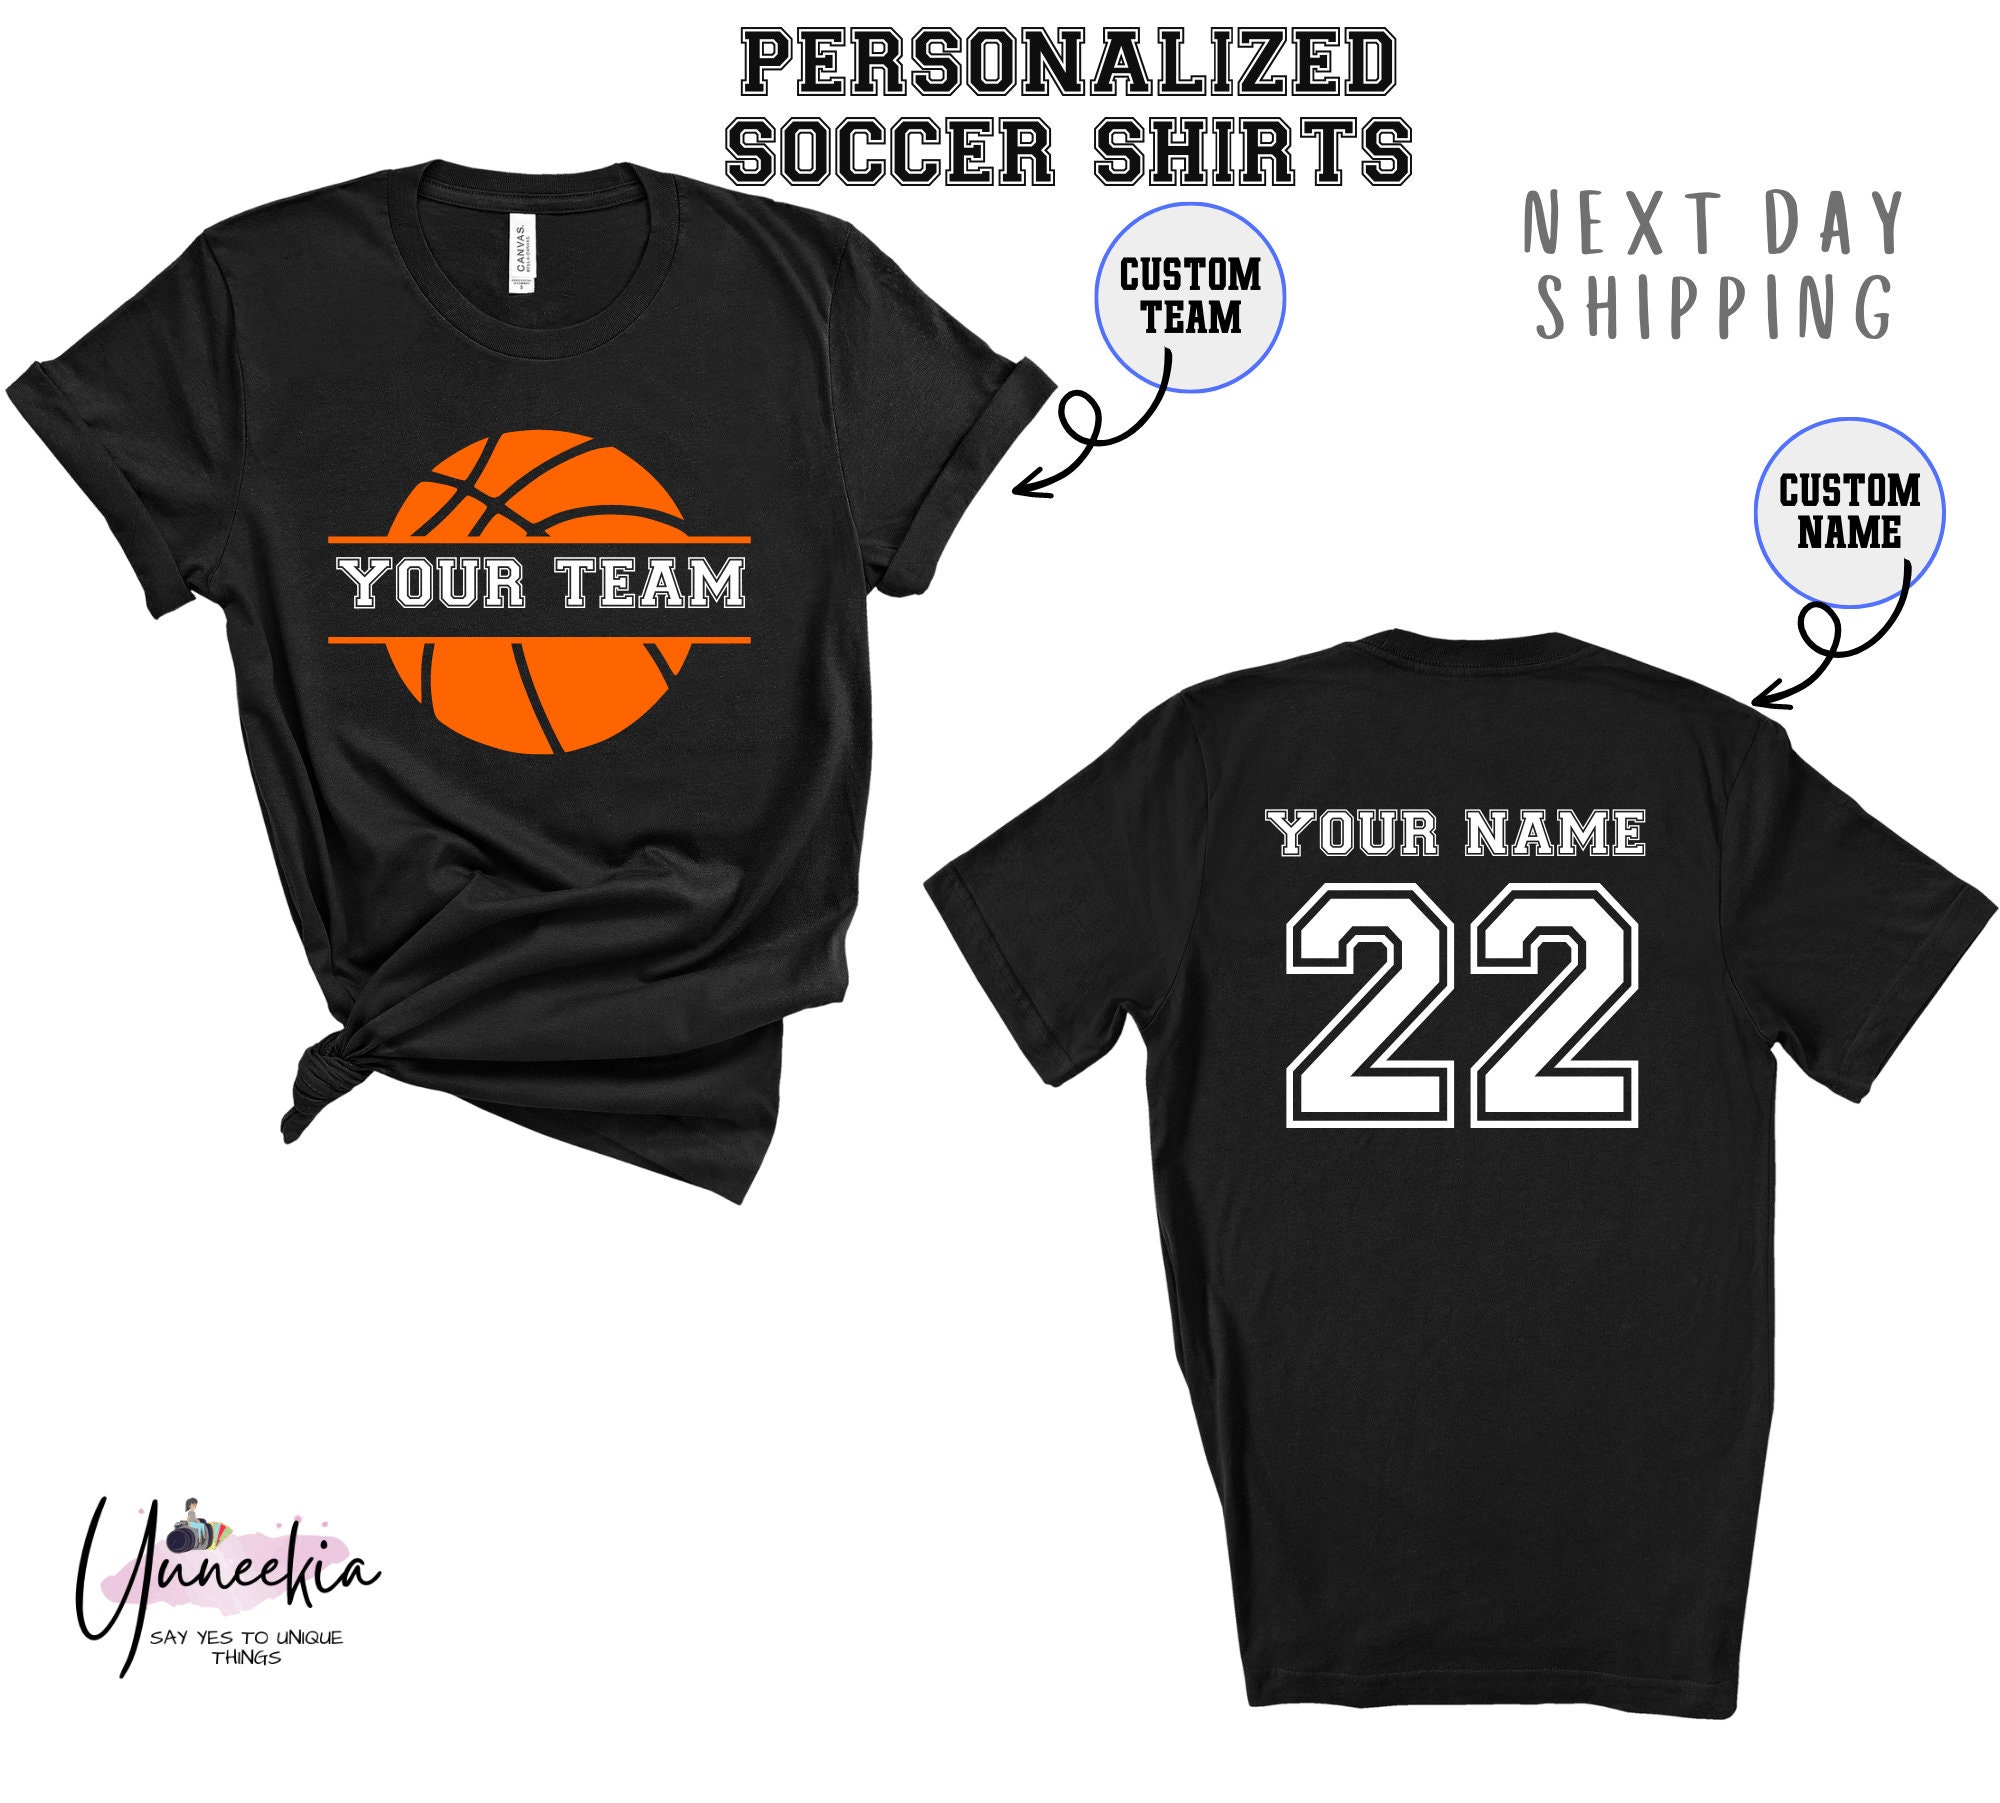 NBA UK - Your Name. Your Number. Your Team. Customize Your